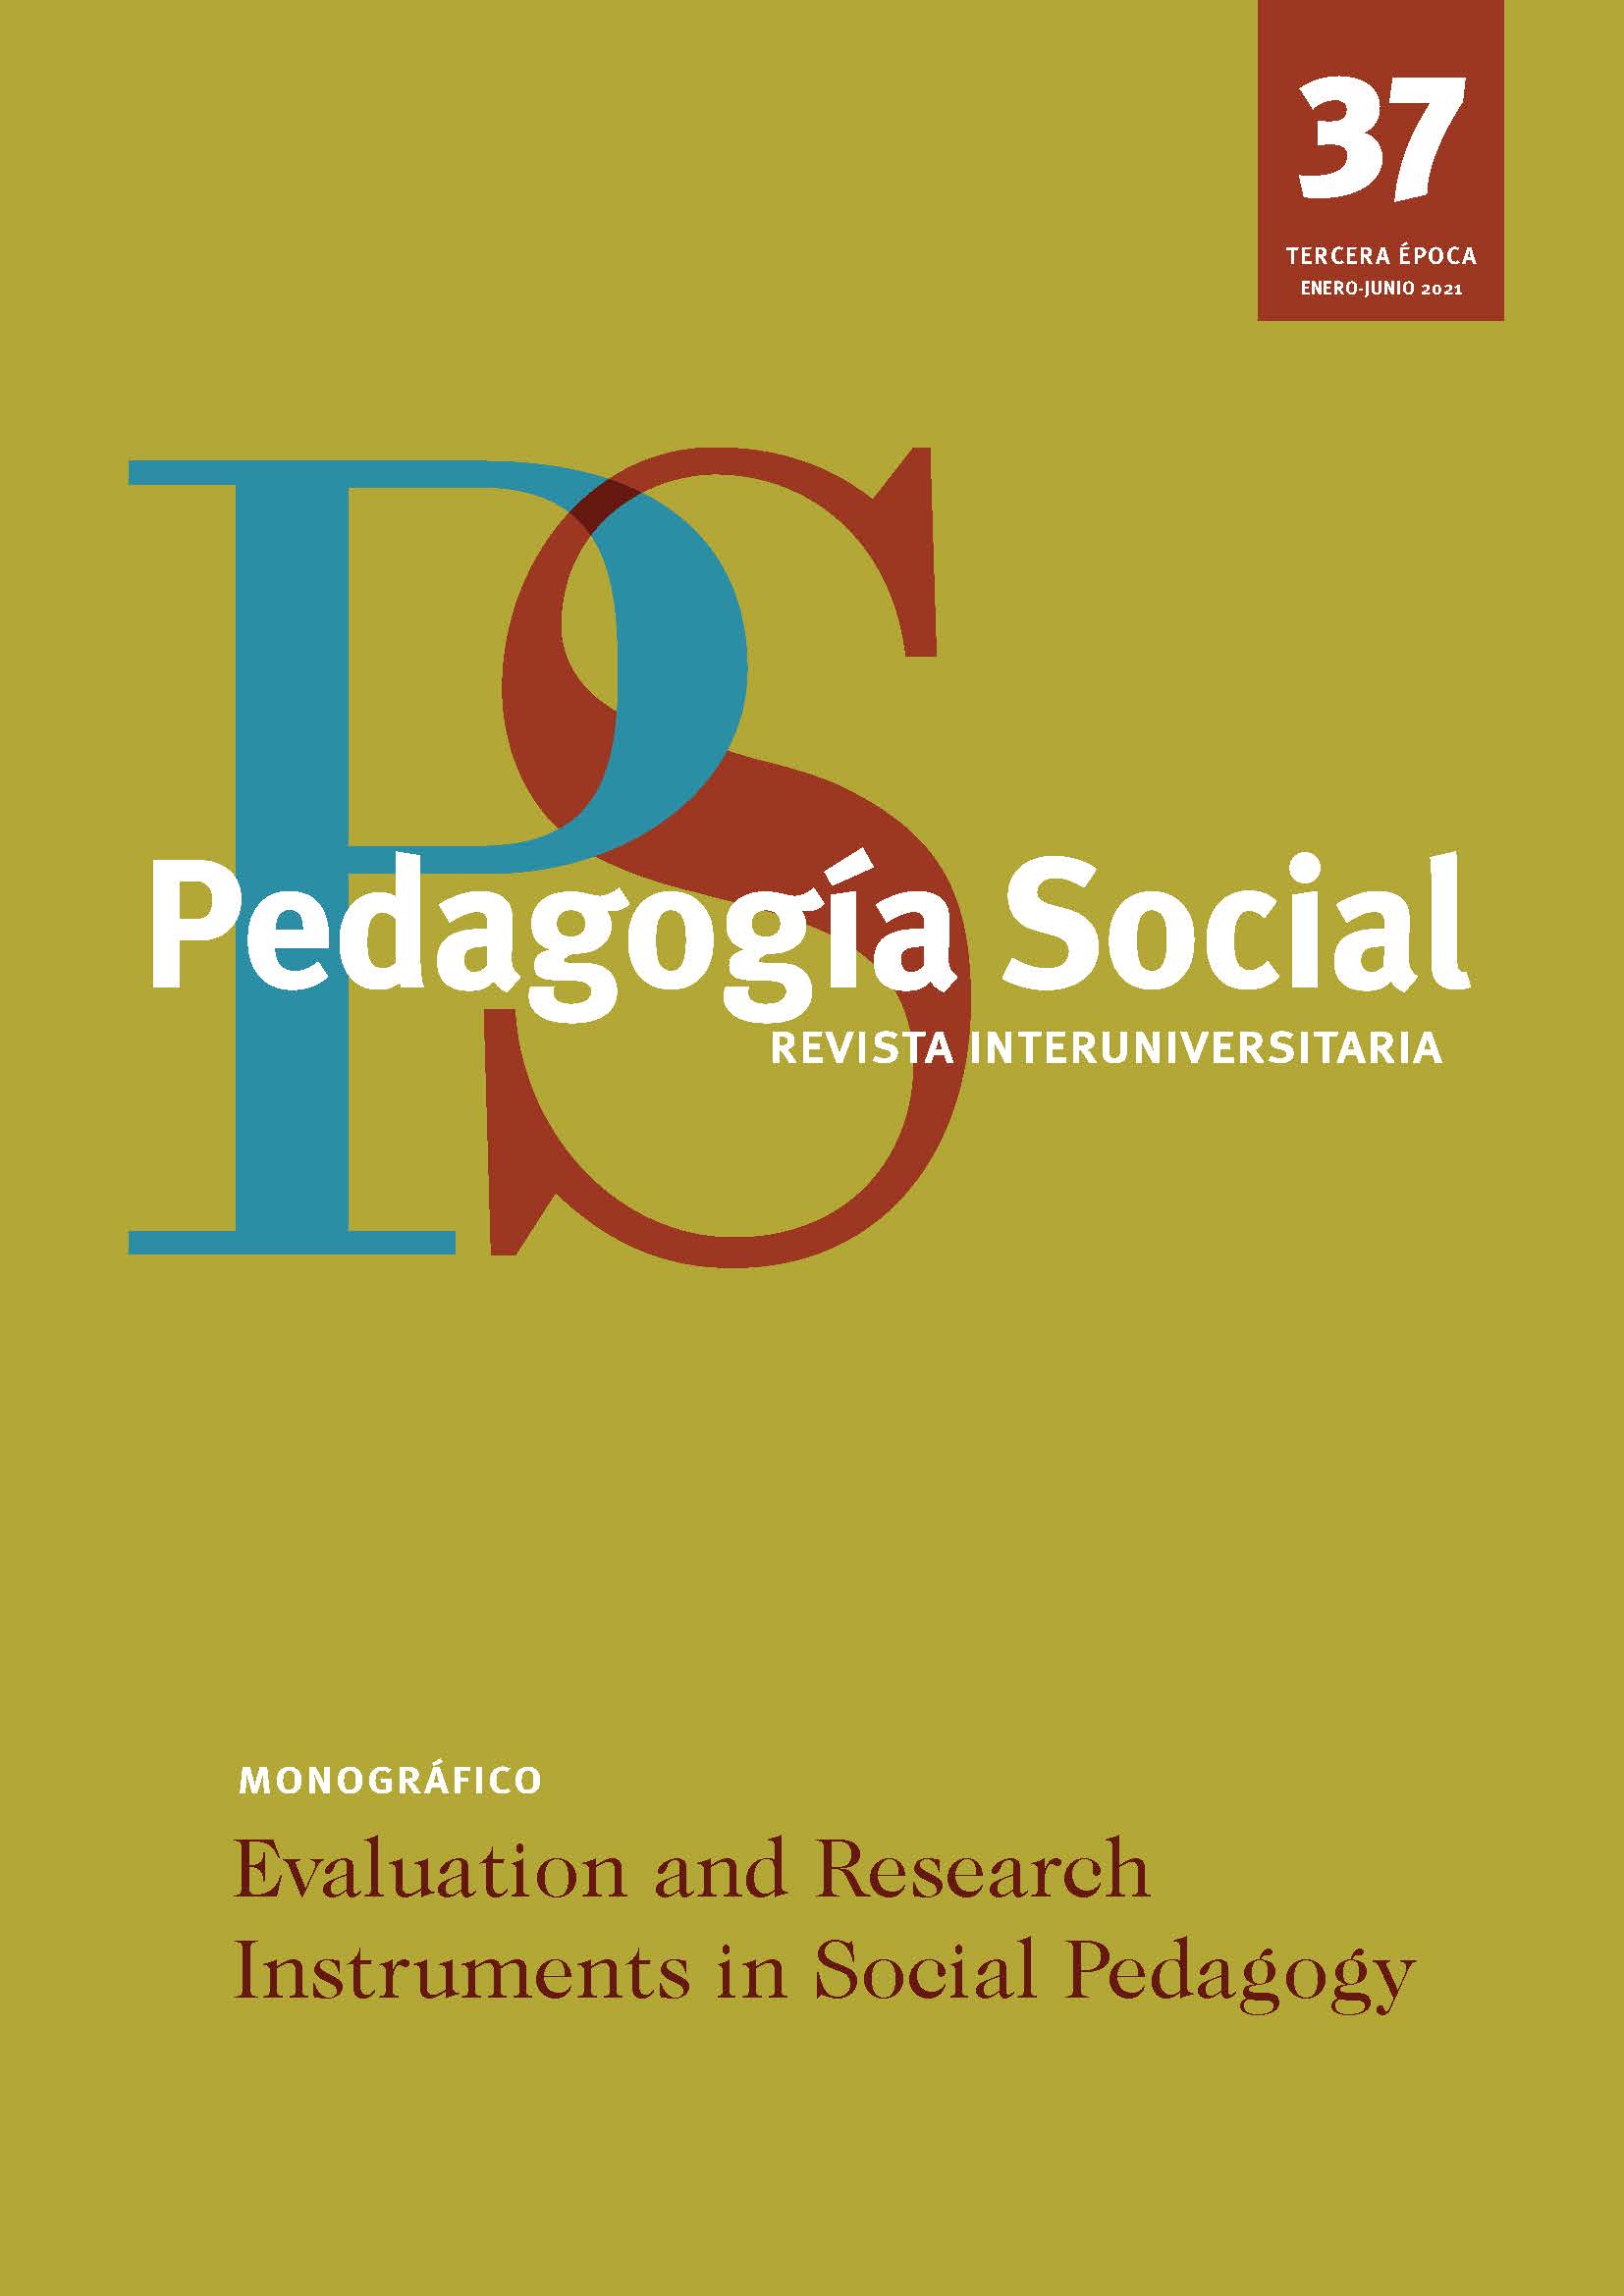 					View No. 37 (2021): Evaluation and Research Instruments in Social Pedagogy
				